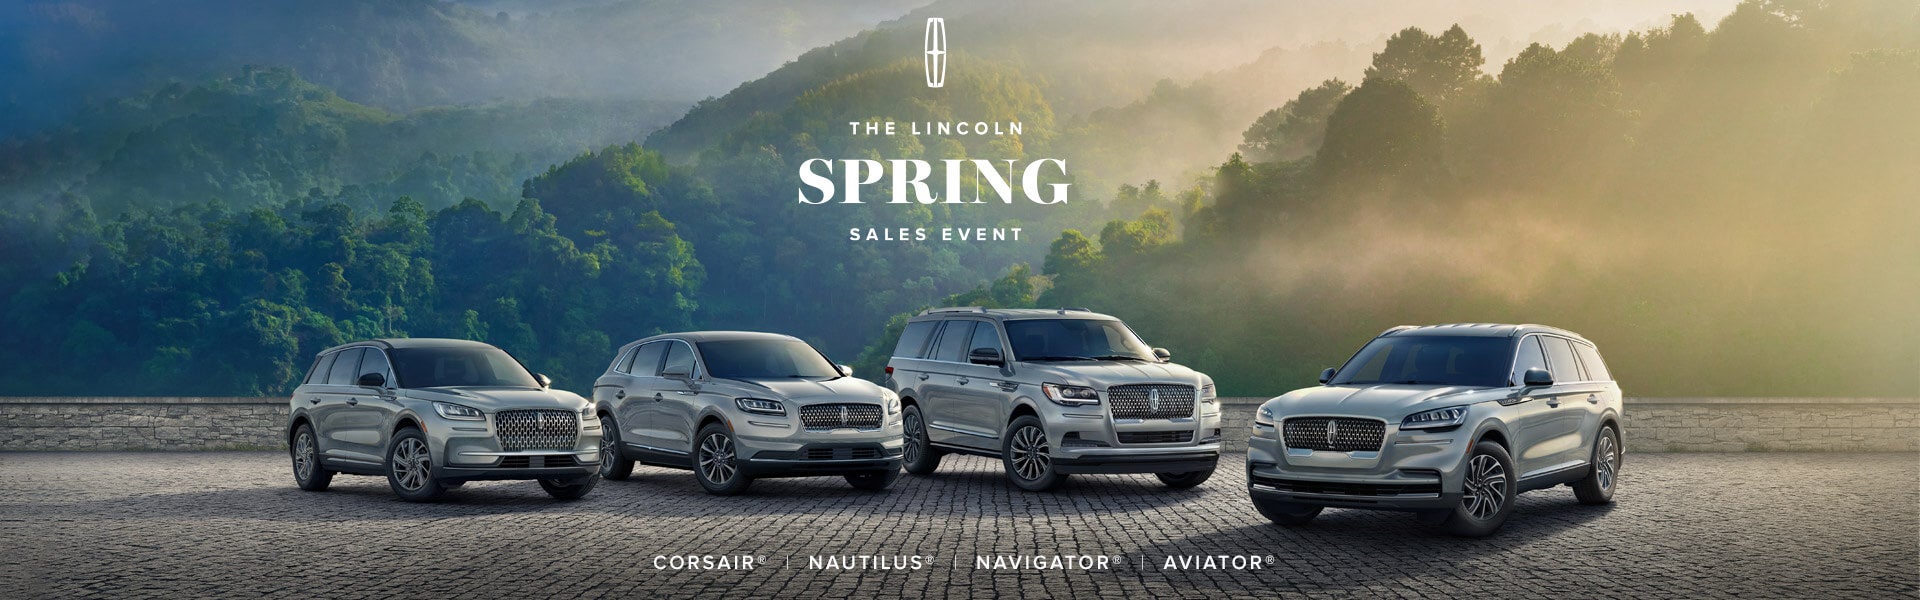 Lincoln Spring Sales Event